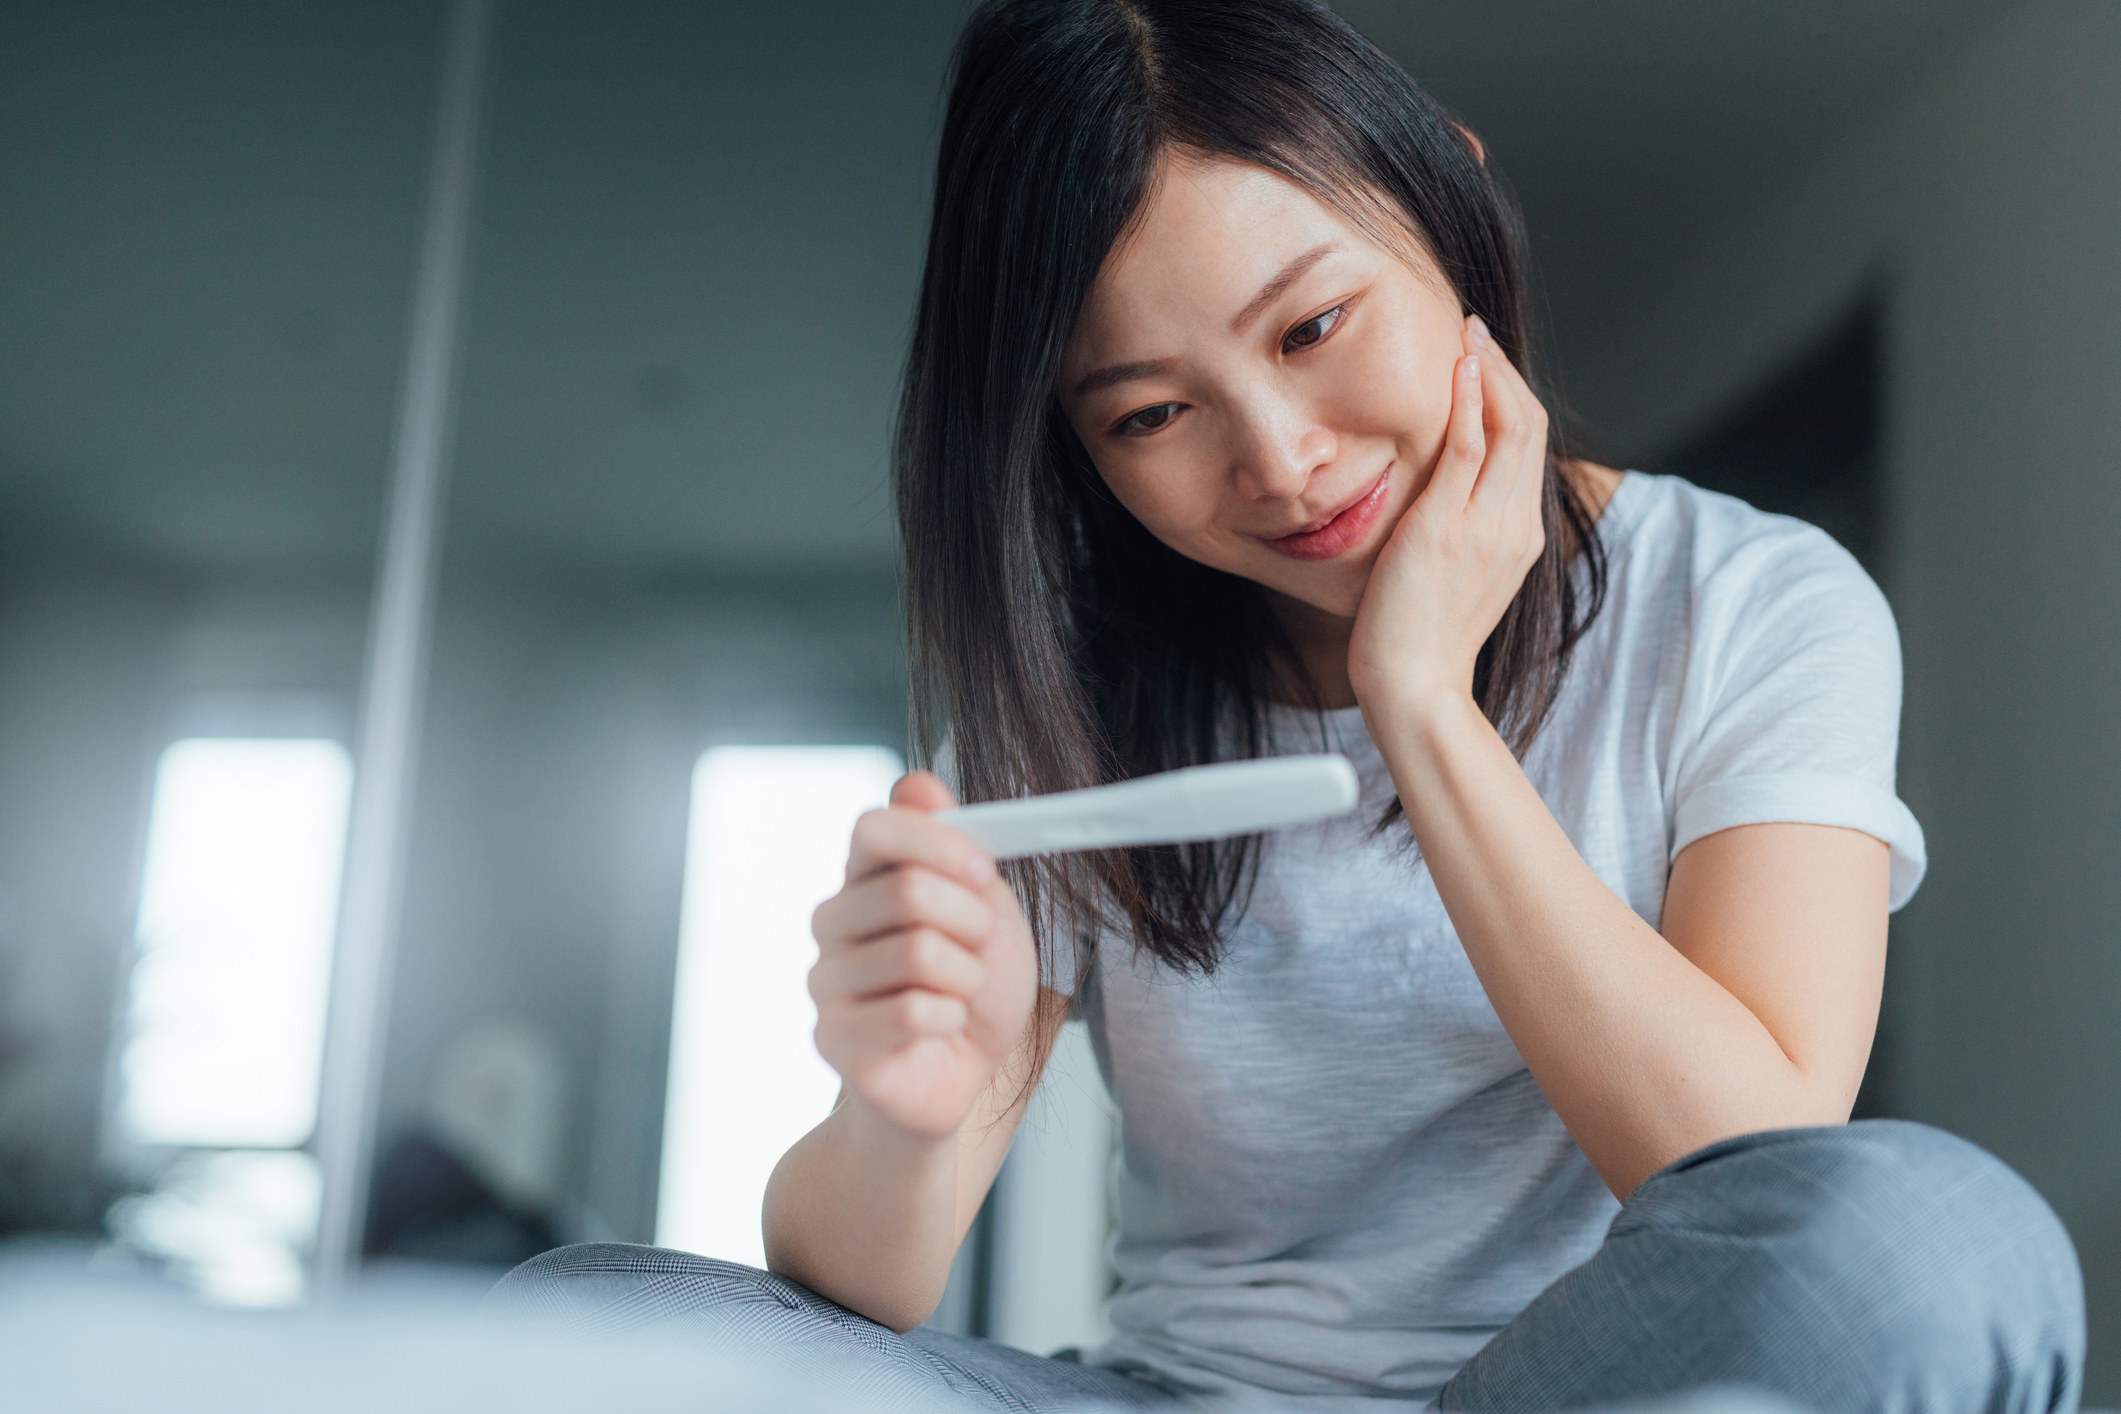 A woman looking at a pregnancy test